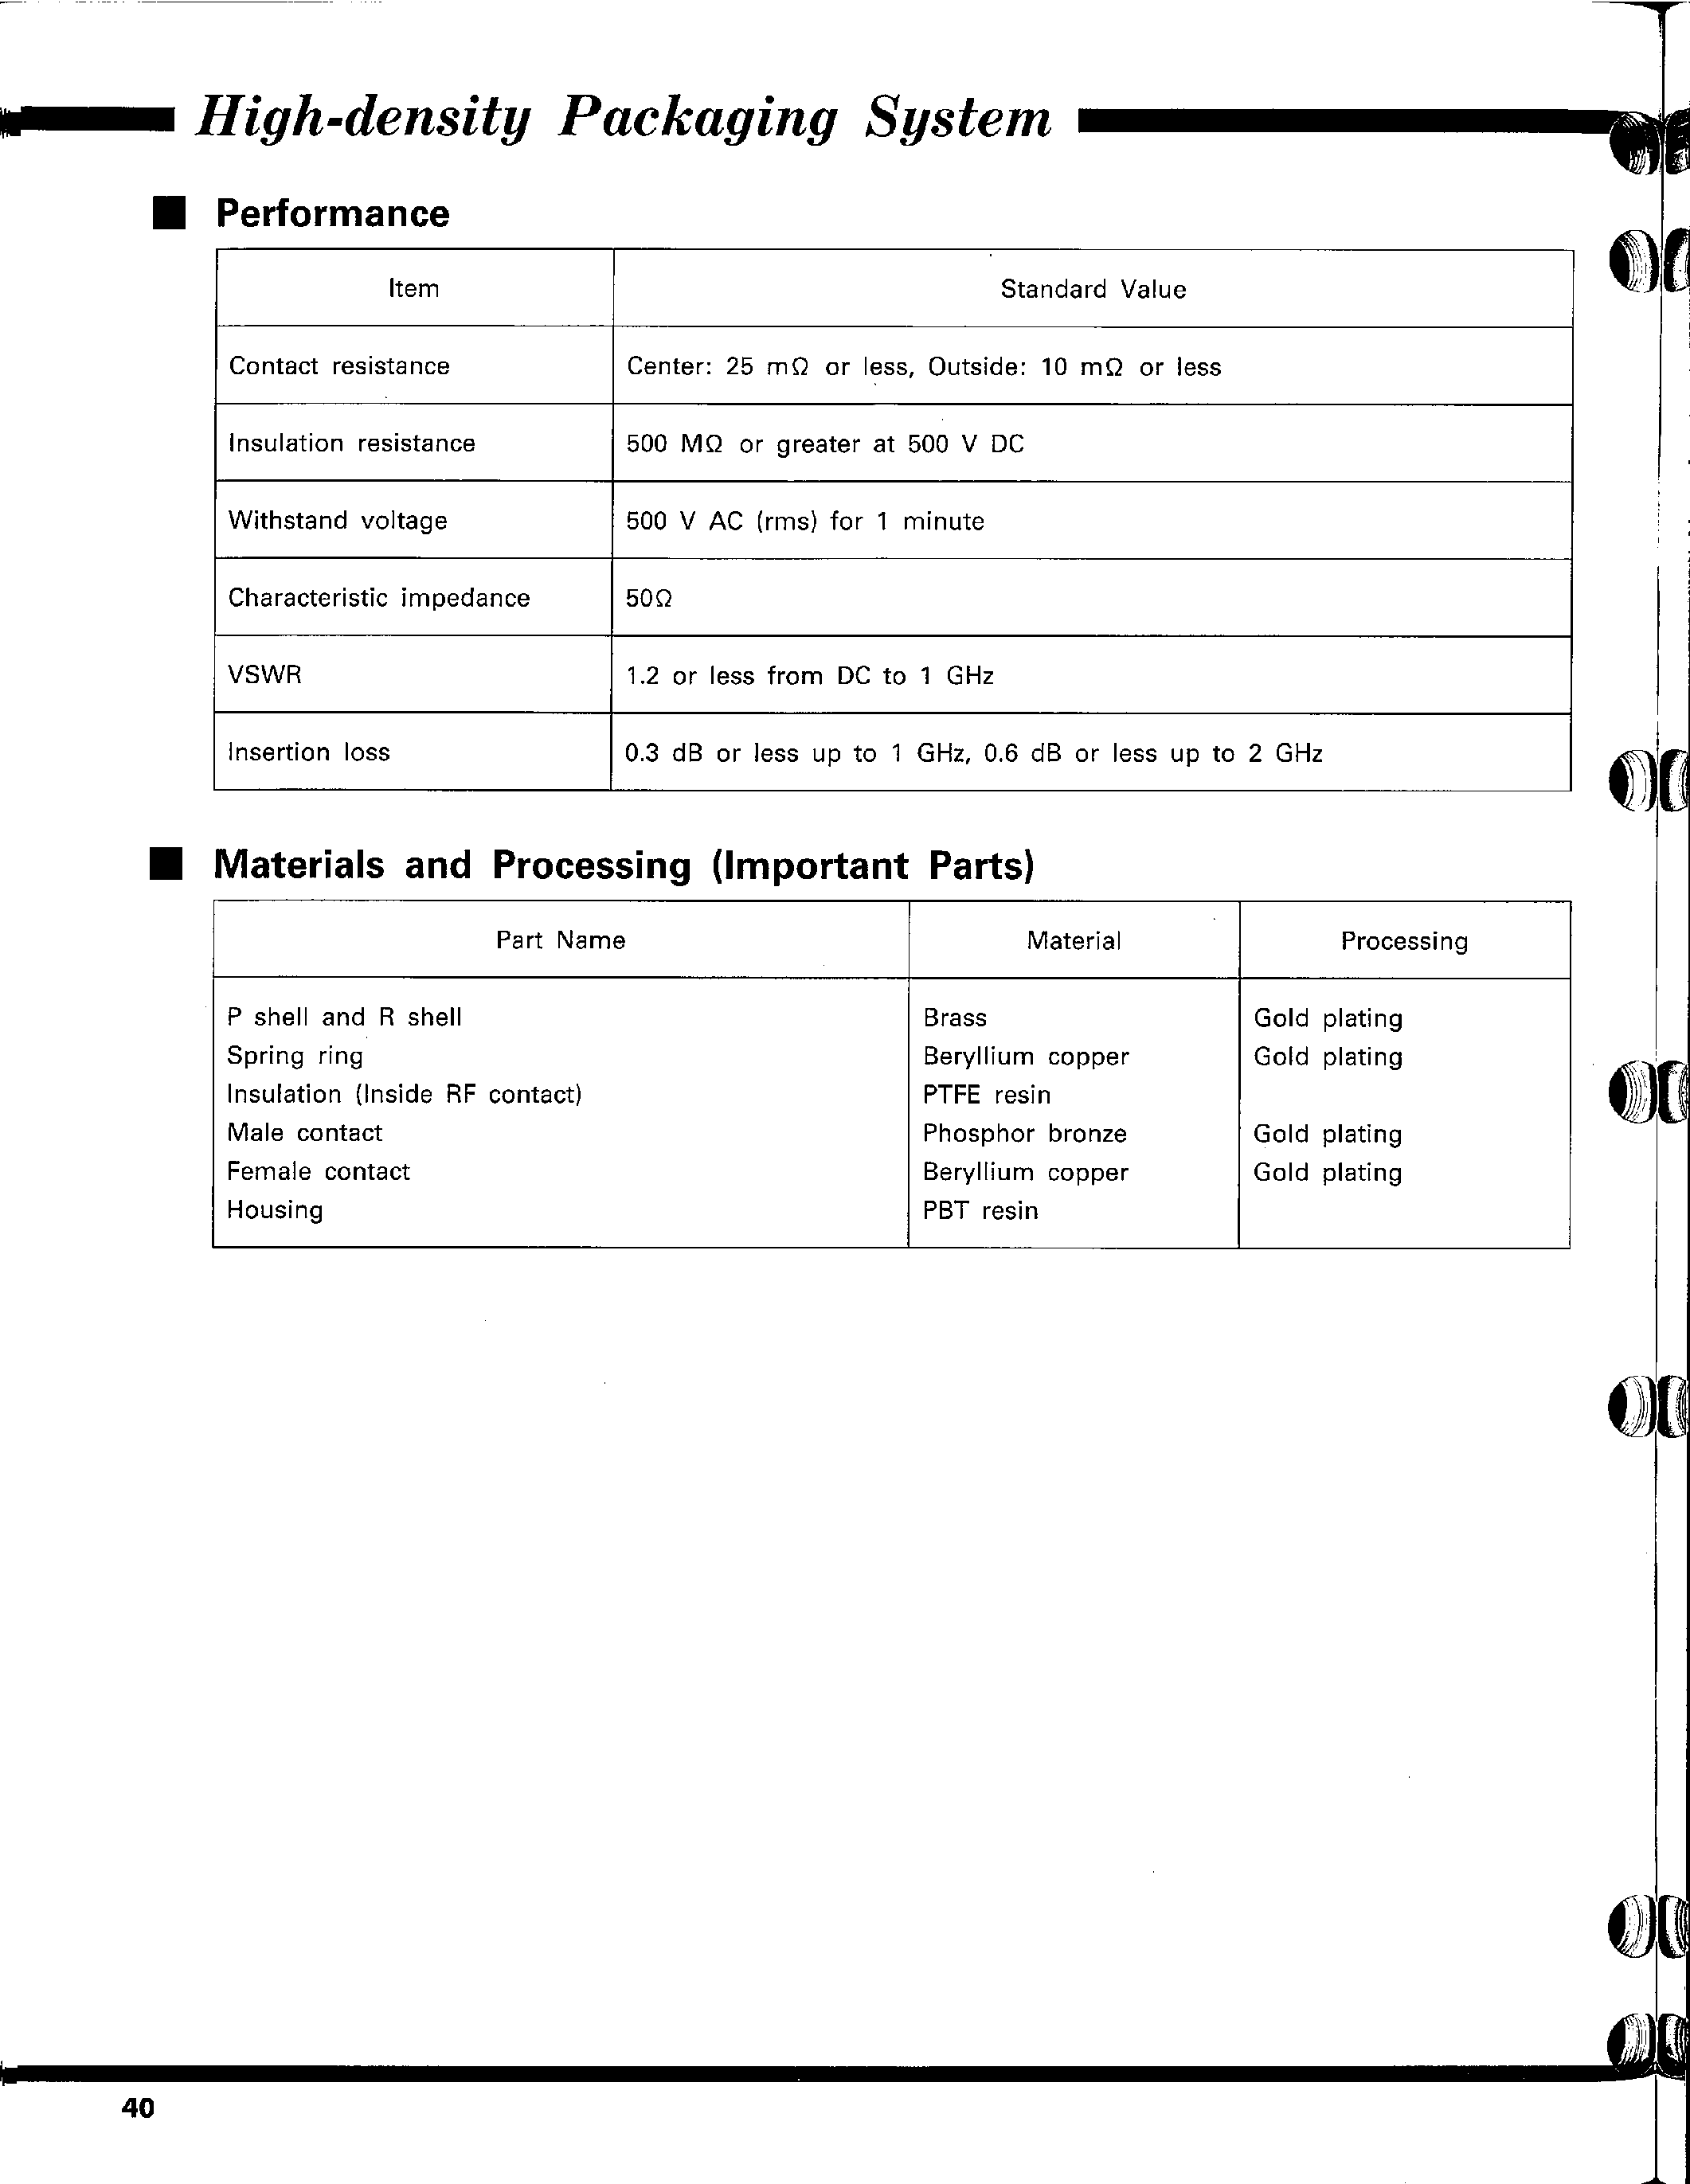 Datasheet PO55-10LR-PC-Z - High-density Packaging System(Coaxial Connectors for Hi-PAS Mounting) page 2